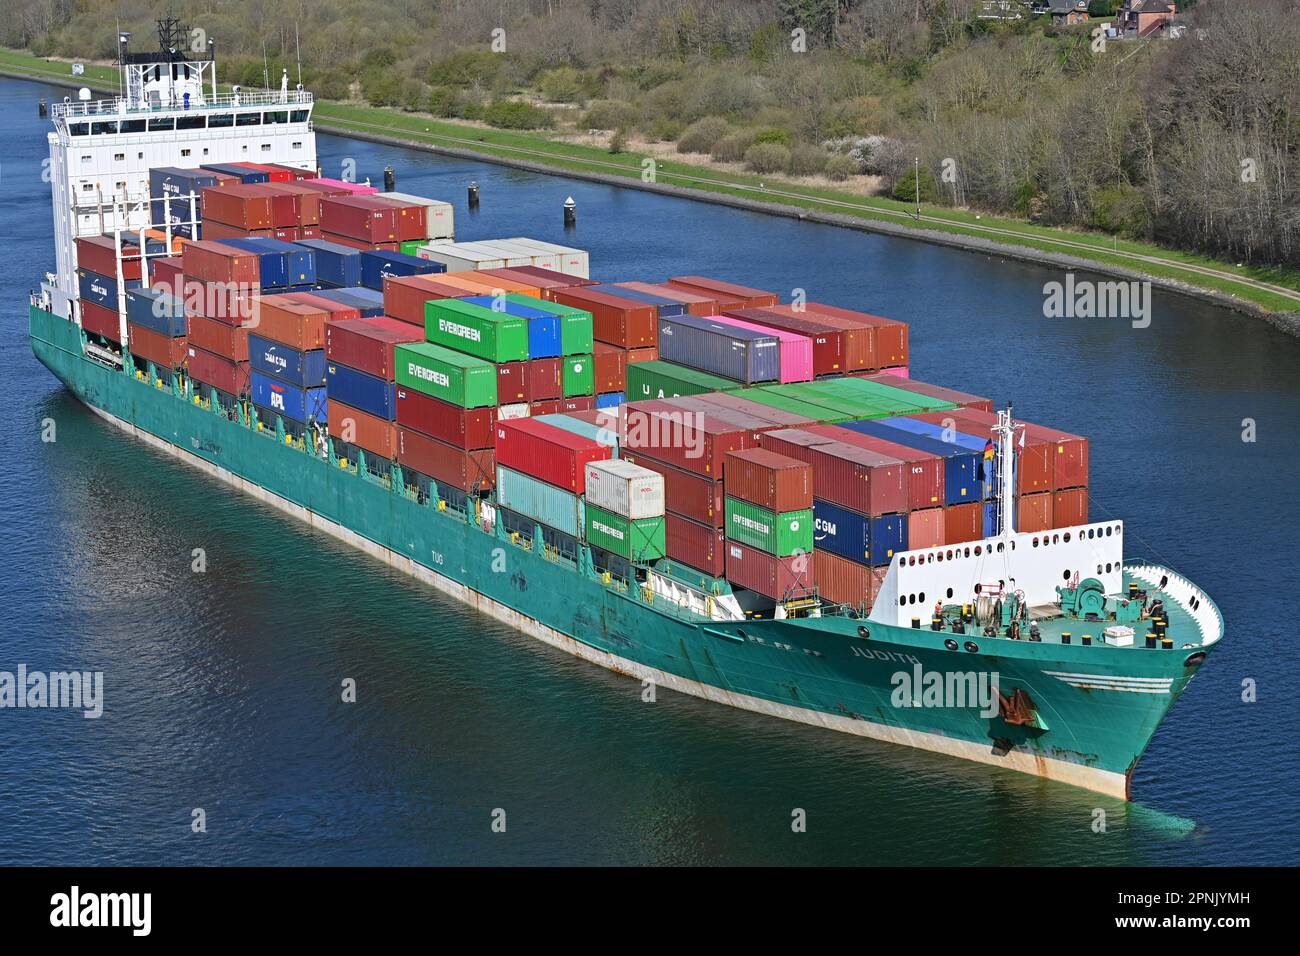 Still showing the green colors of its former owner Schepers, Rambow Shippings JUDITH is passing the Kiel Canal carrying containers for the baltic Stock Photo